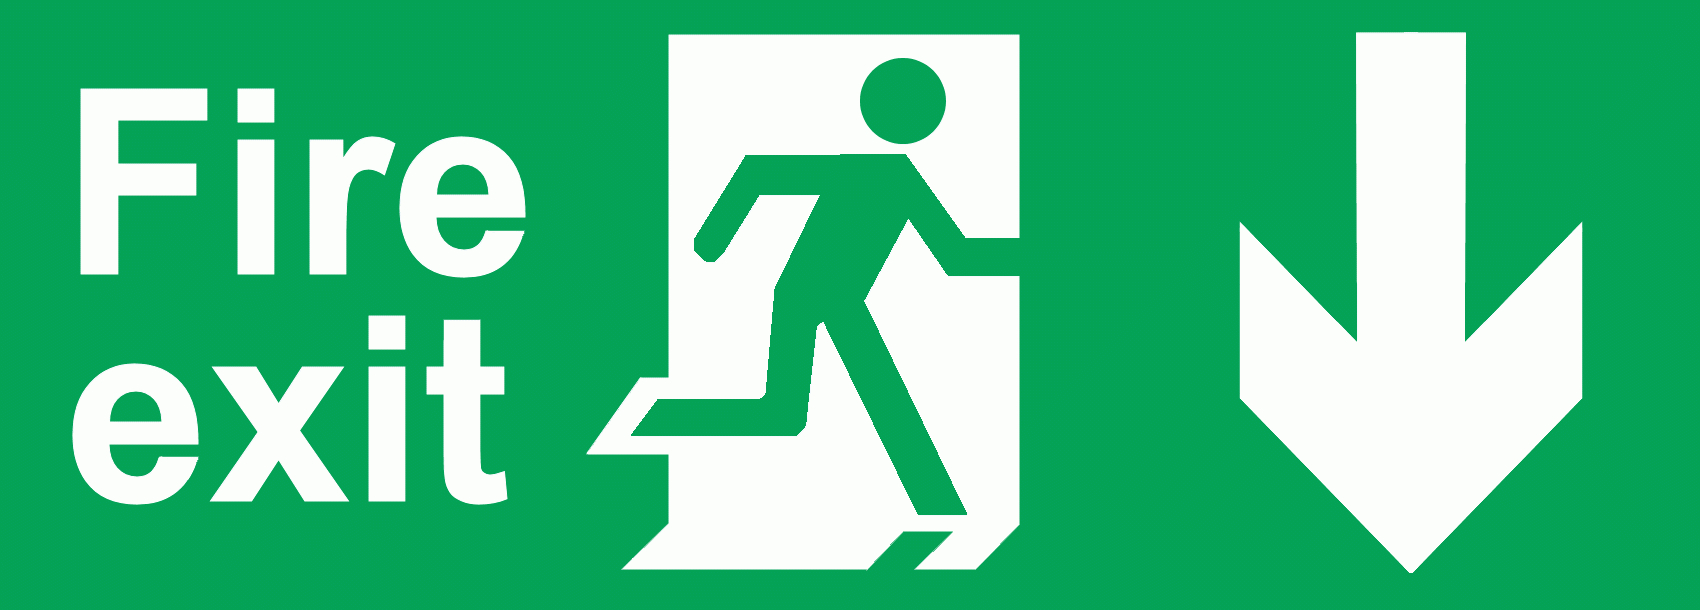 Free Fire Exit Signs, Download Free Clip Art, Free Clip Art On - Free Printable Exit Signs With Arrow